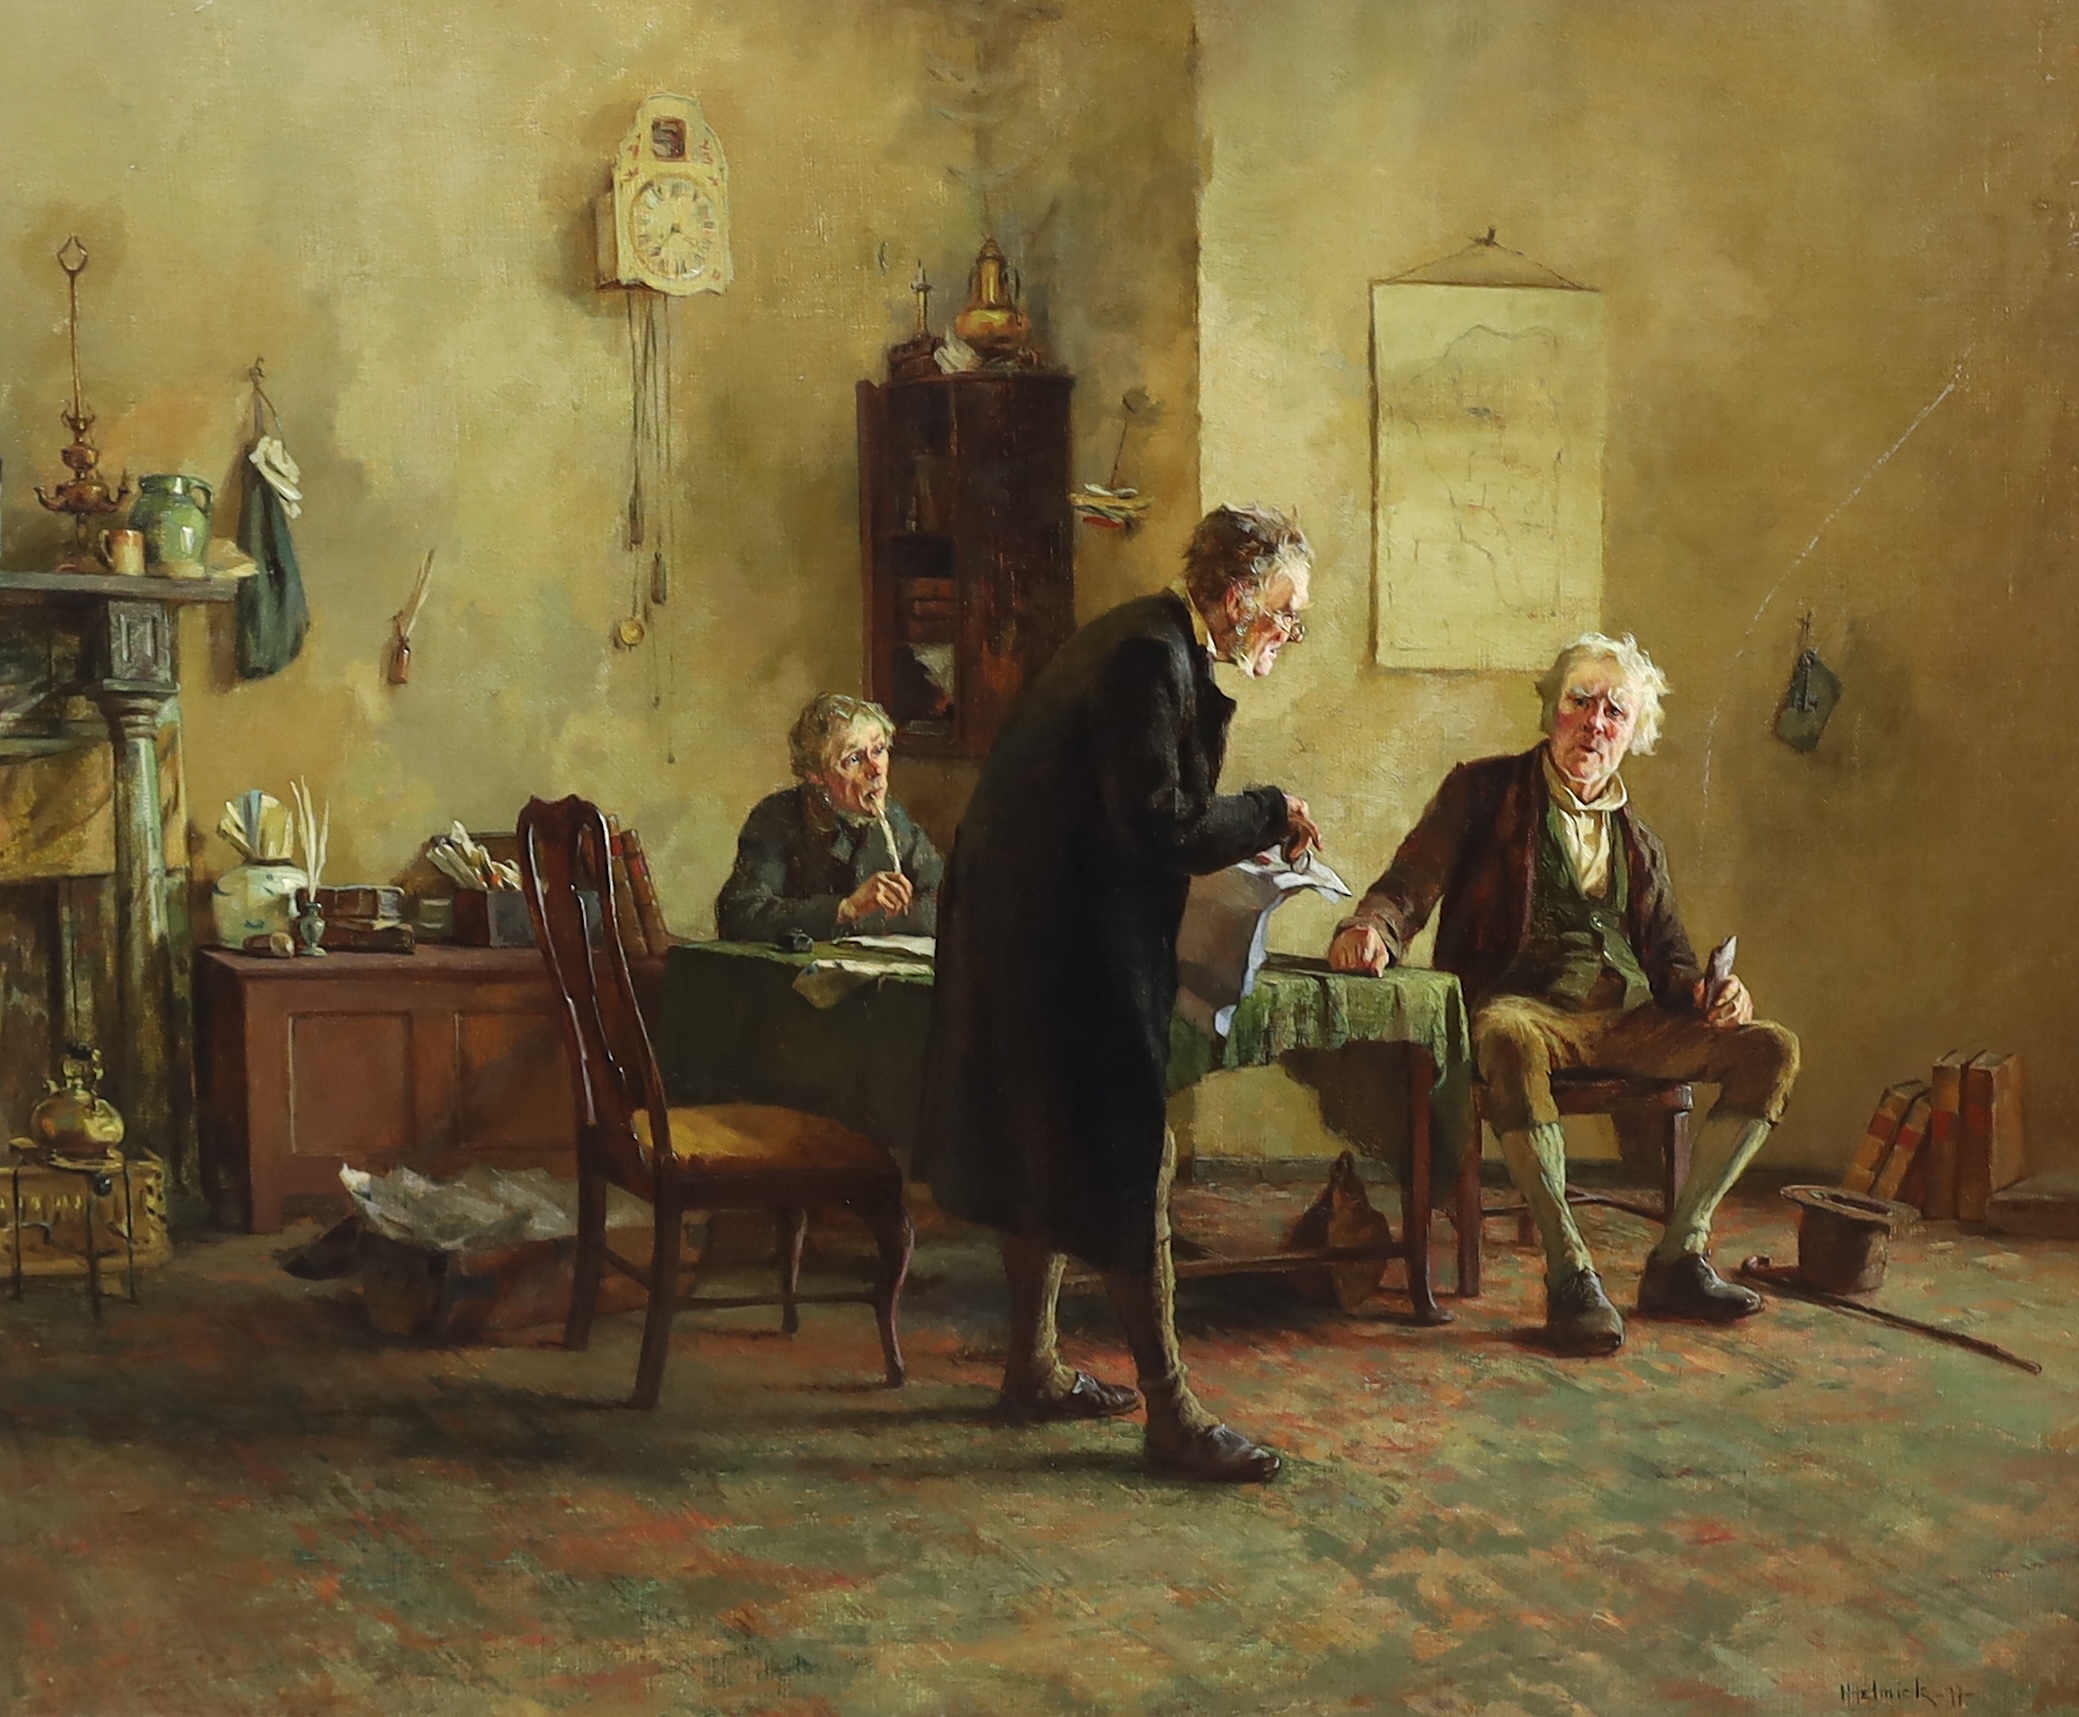 Howard Helmick (American, 1845-1907), 'The Lawyer's Office', oil on canvas, 57 x 68cm